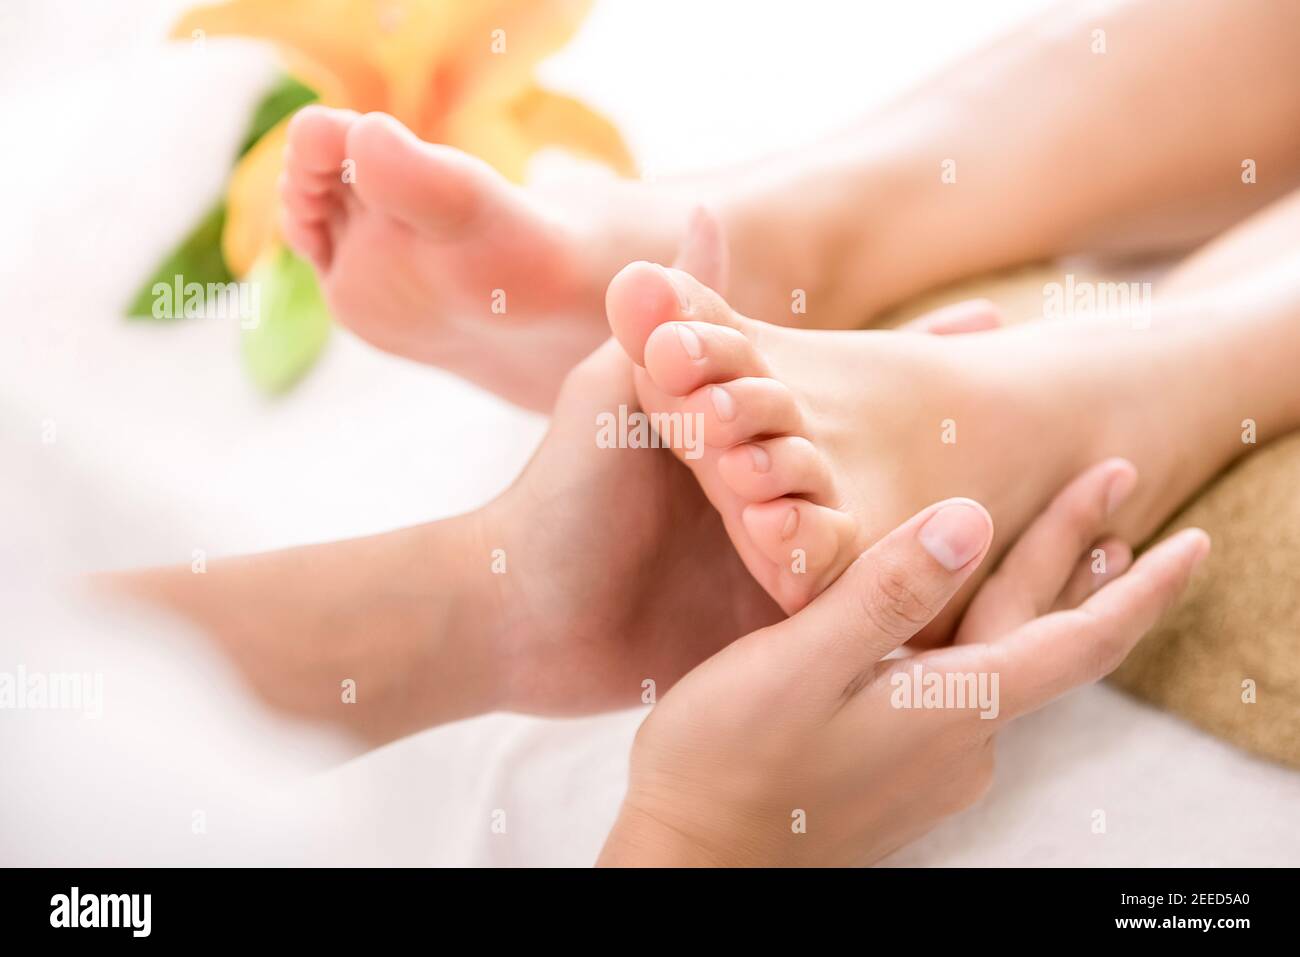 Professional therapist giving relaxing reflexology Thai foot massage treatment to a woman in spa Stock Photo